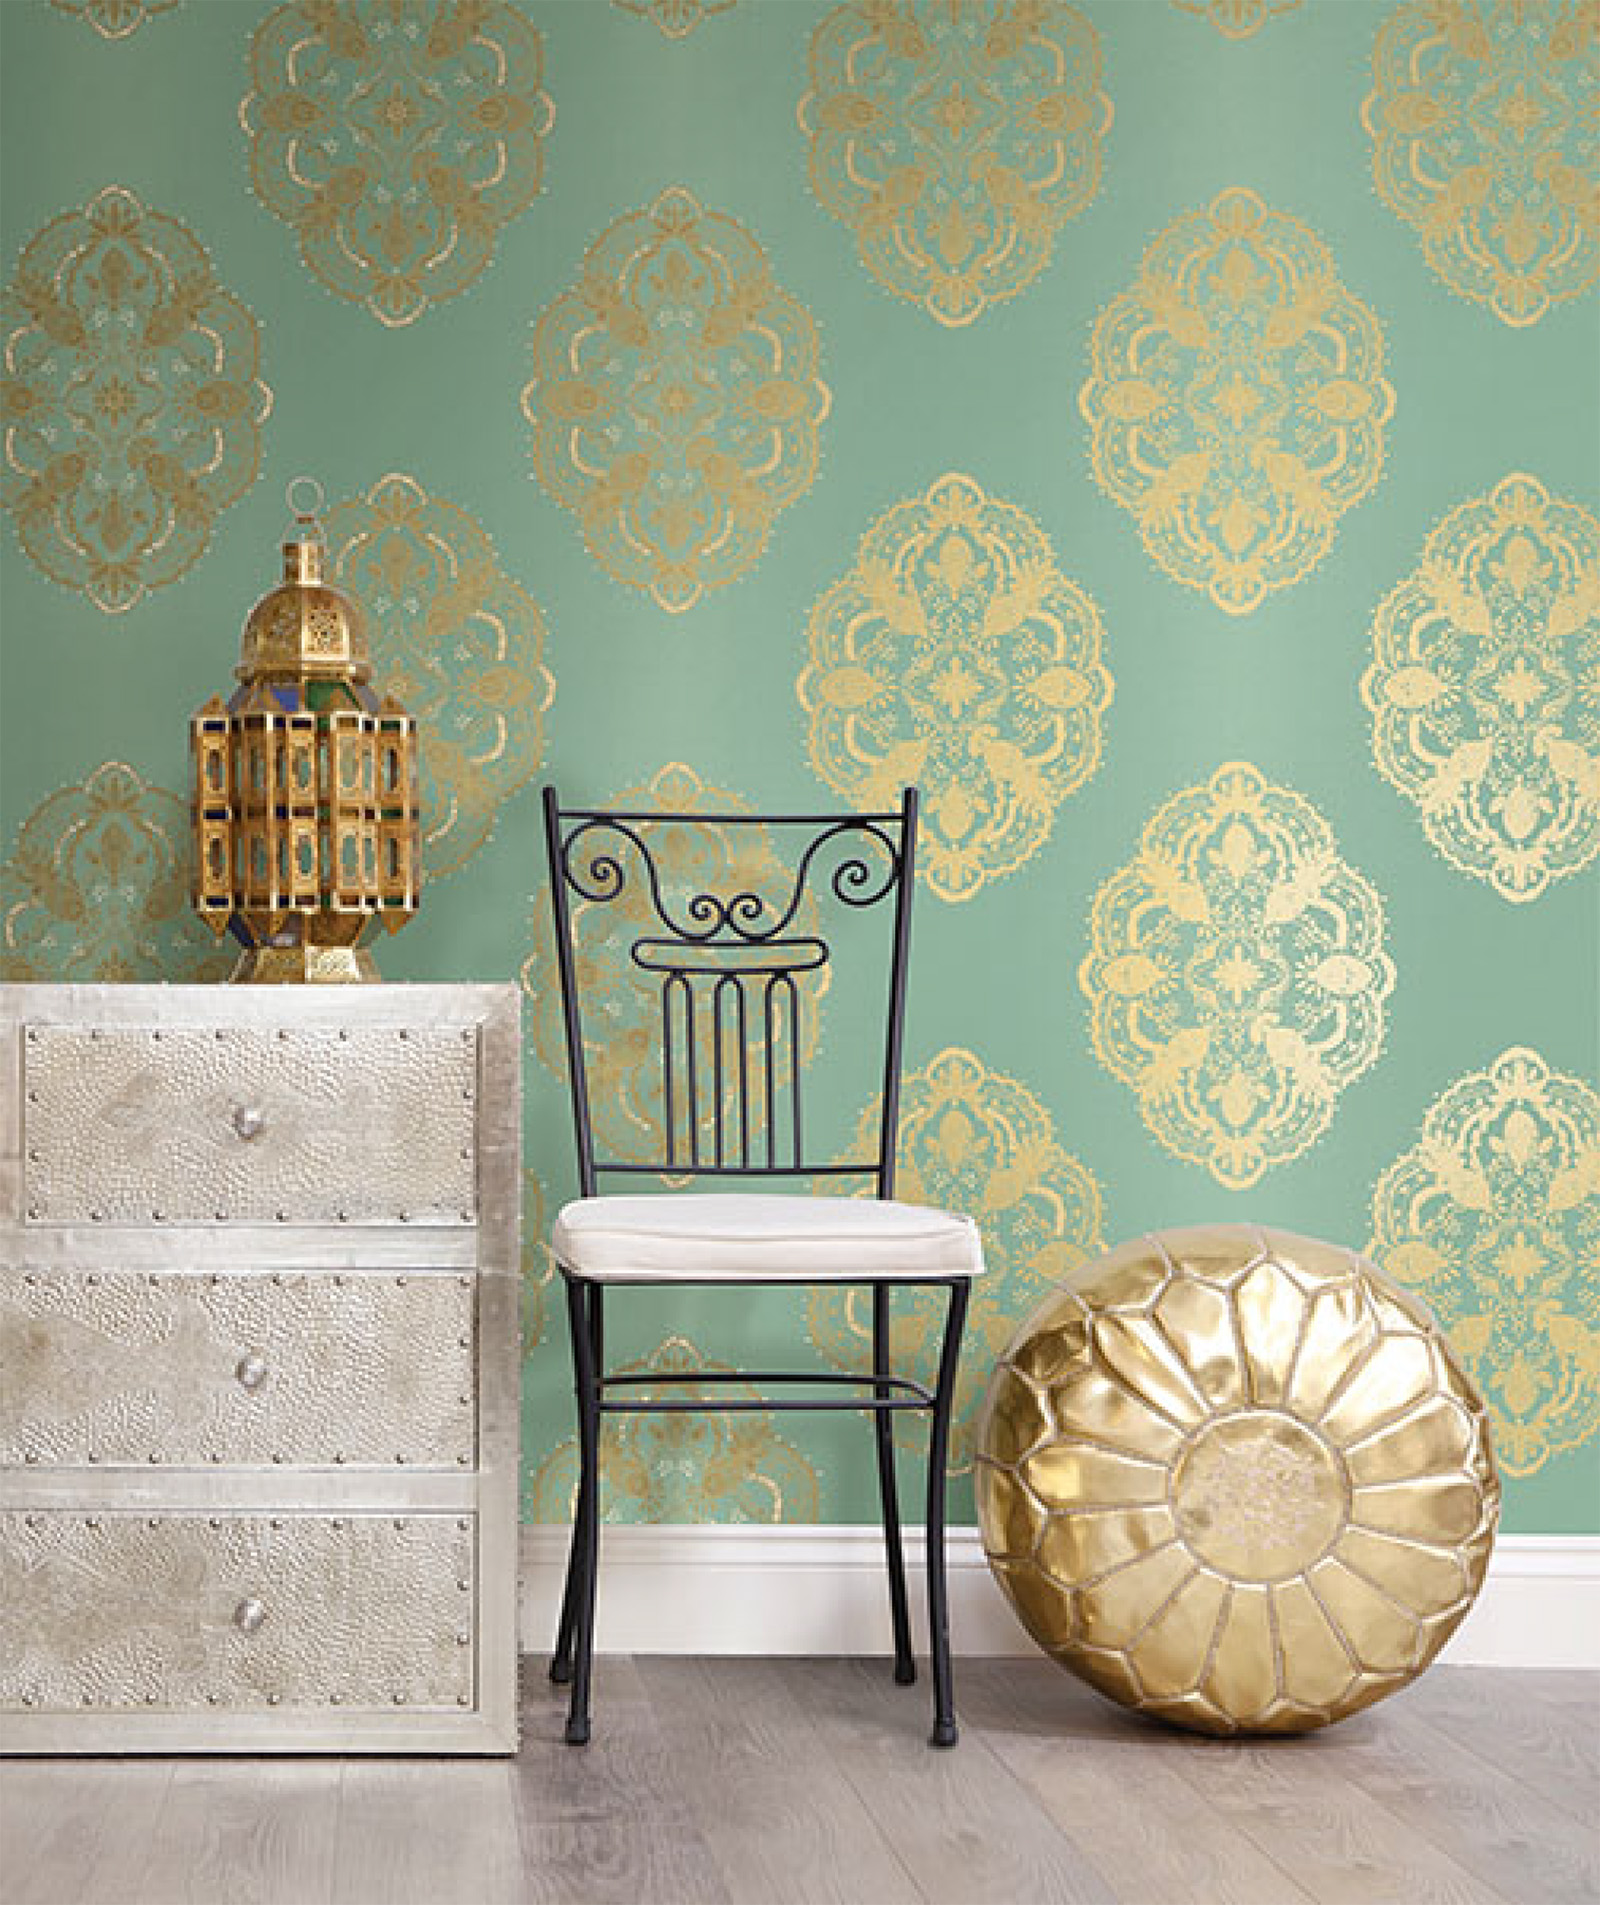 Medallions Atop An Aqua Landscape Makes A Chic Statement In Any Room